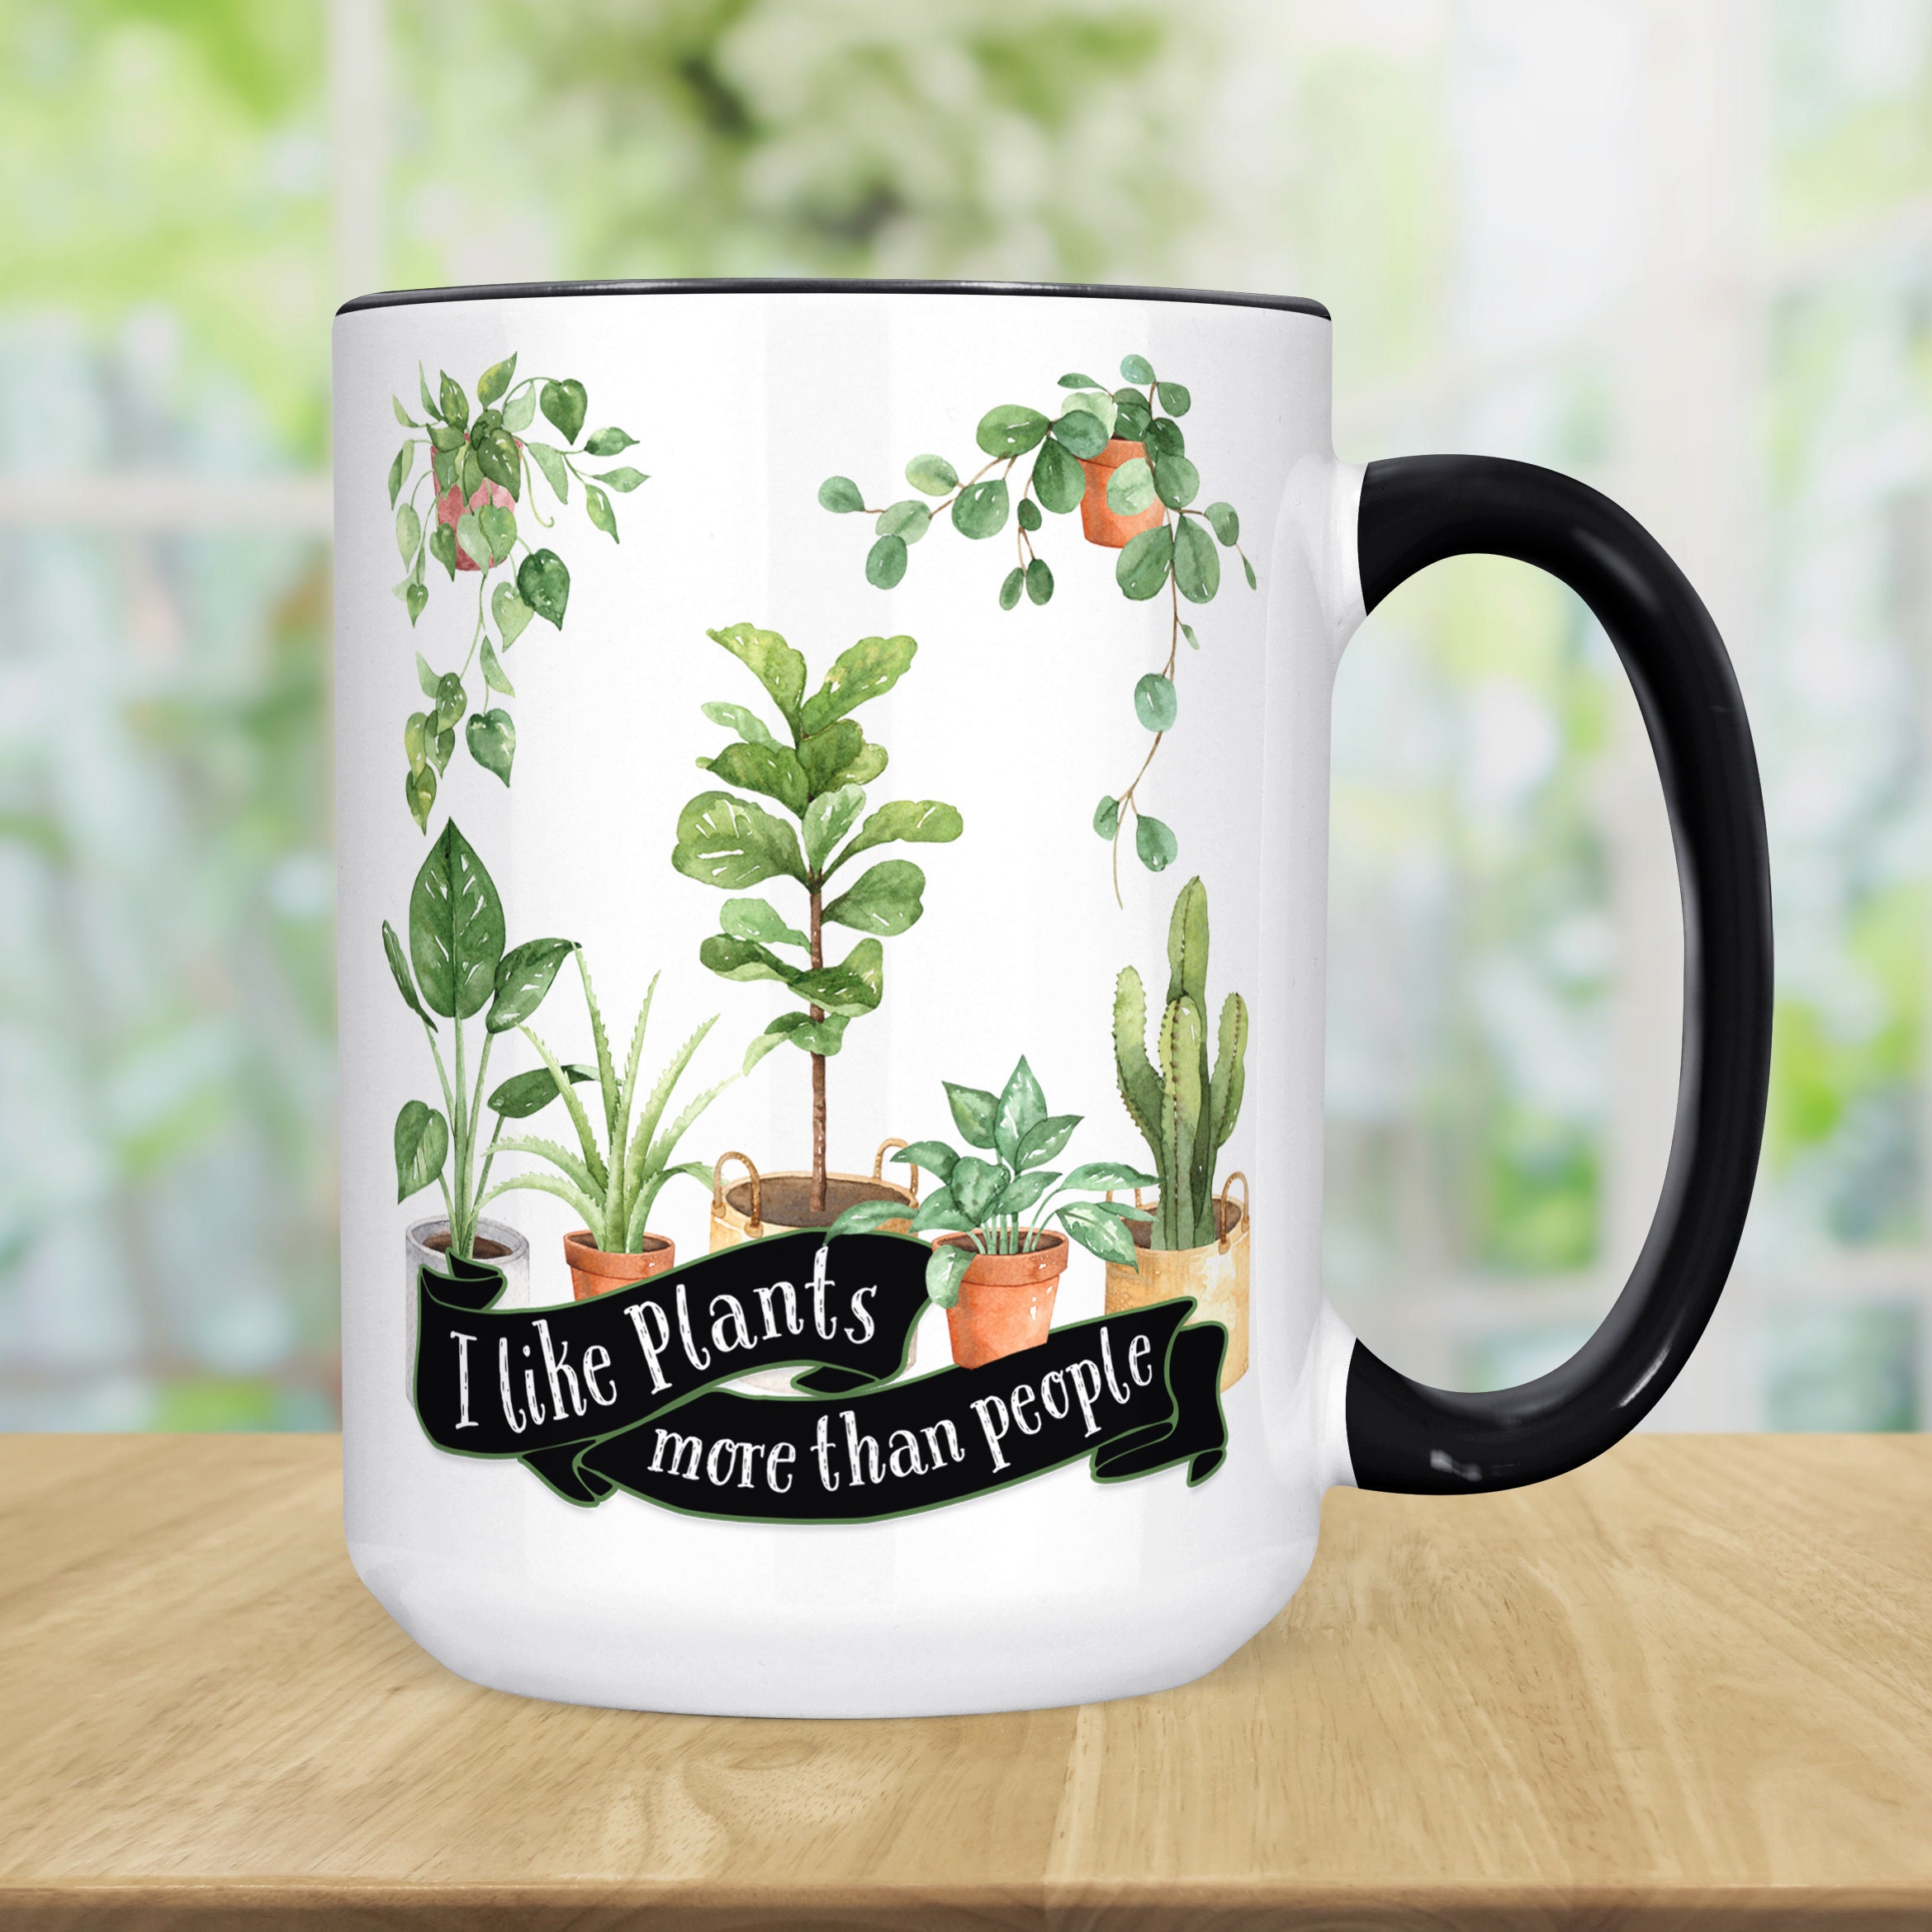 Plant Lover Gift You Can't Buy Happiness But You Can Buy Plants Mug Plant Mom Gift Plant Lover Plant Gift Plant Mom Plant Mug